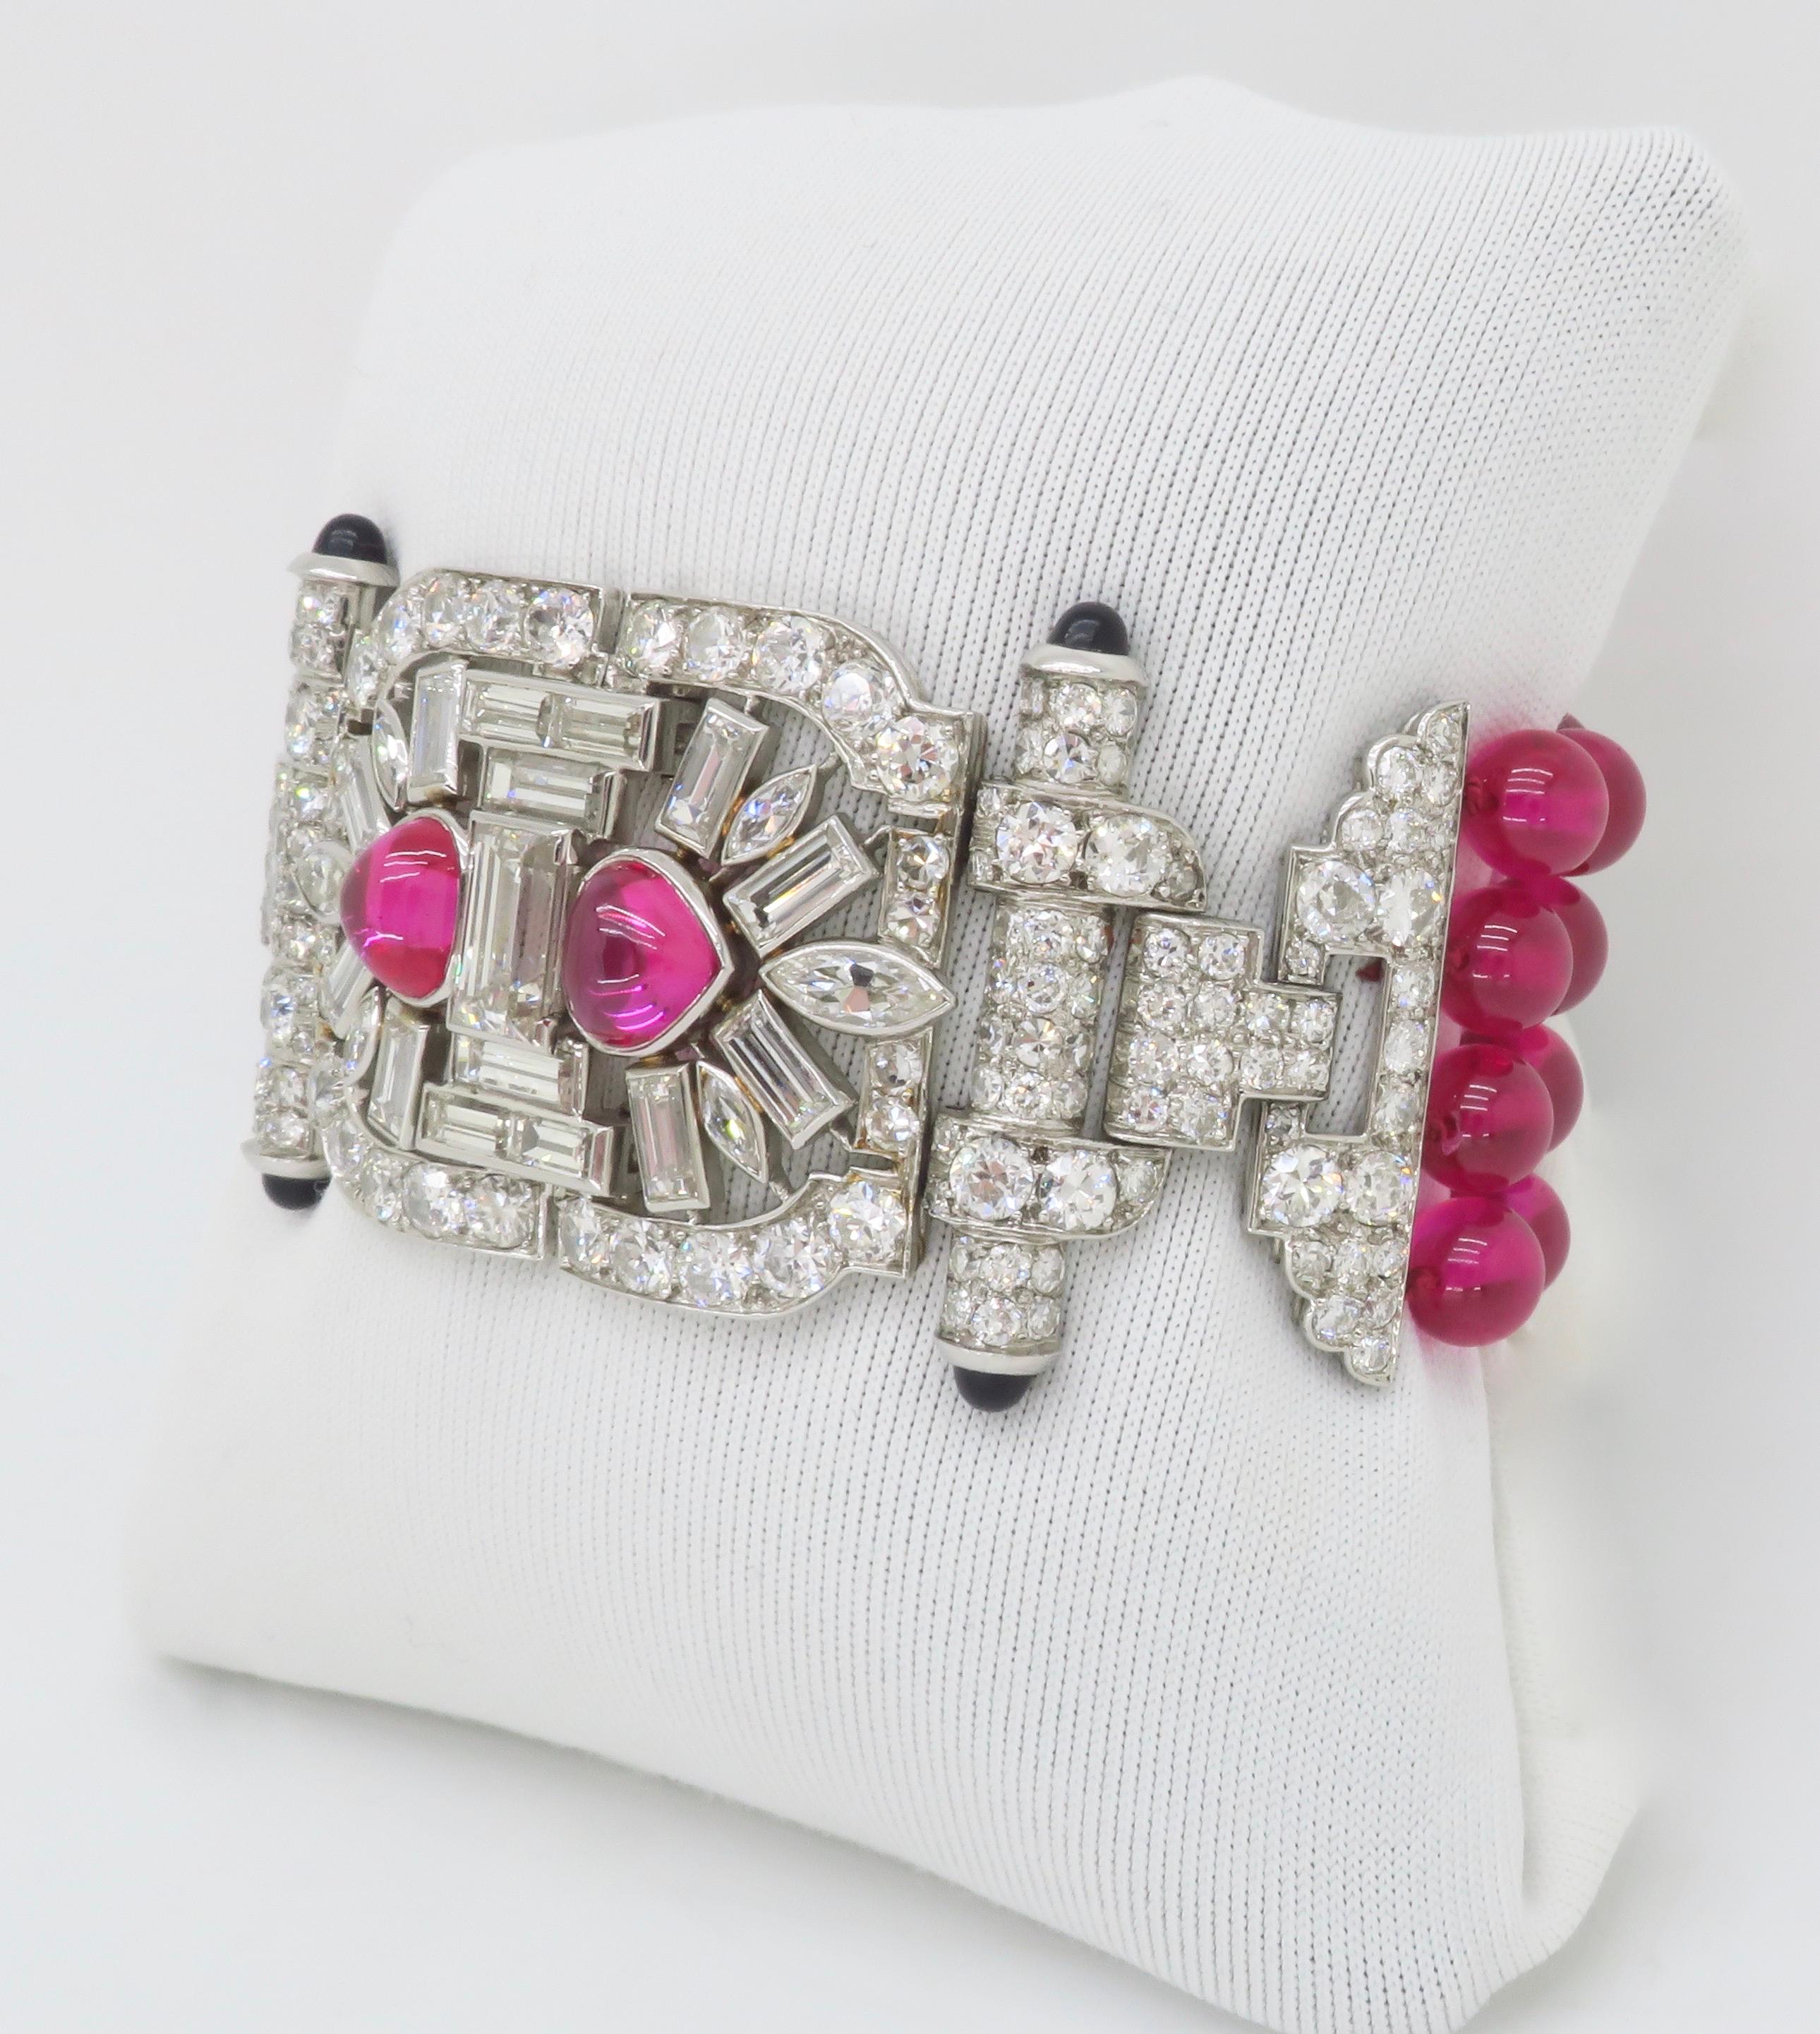 Platinum 18.04CTW Diamond Buckle Bracelet made with Ruby Beads In Excellent Condition For Sale In Webster, NY